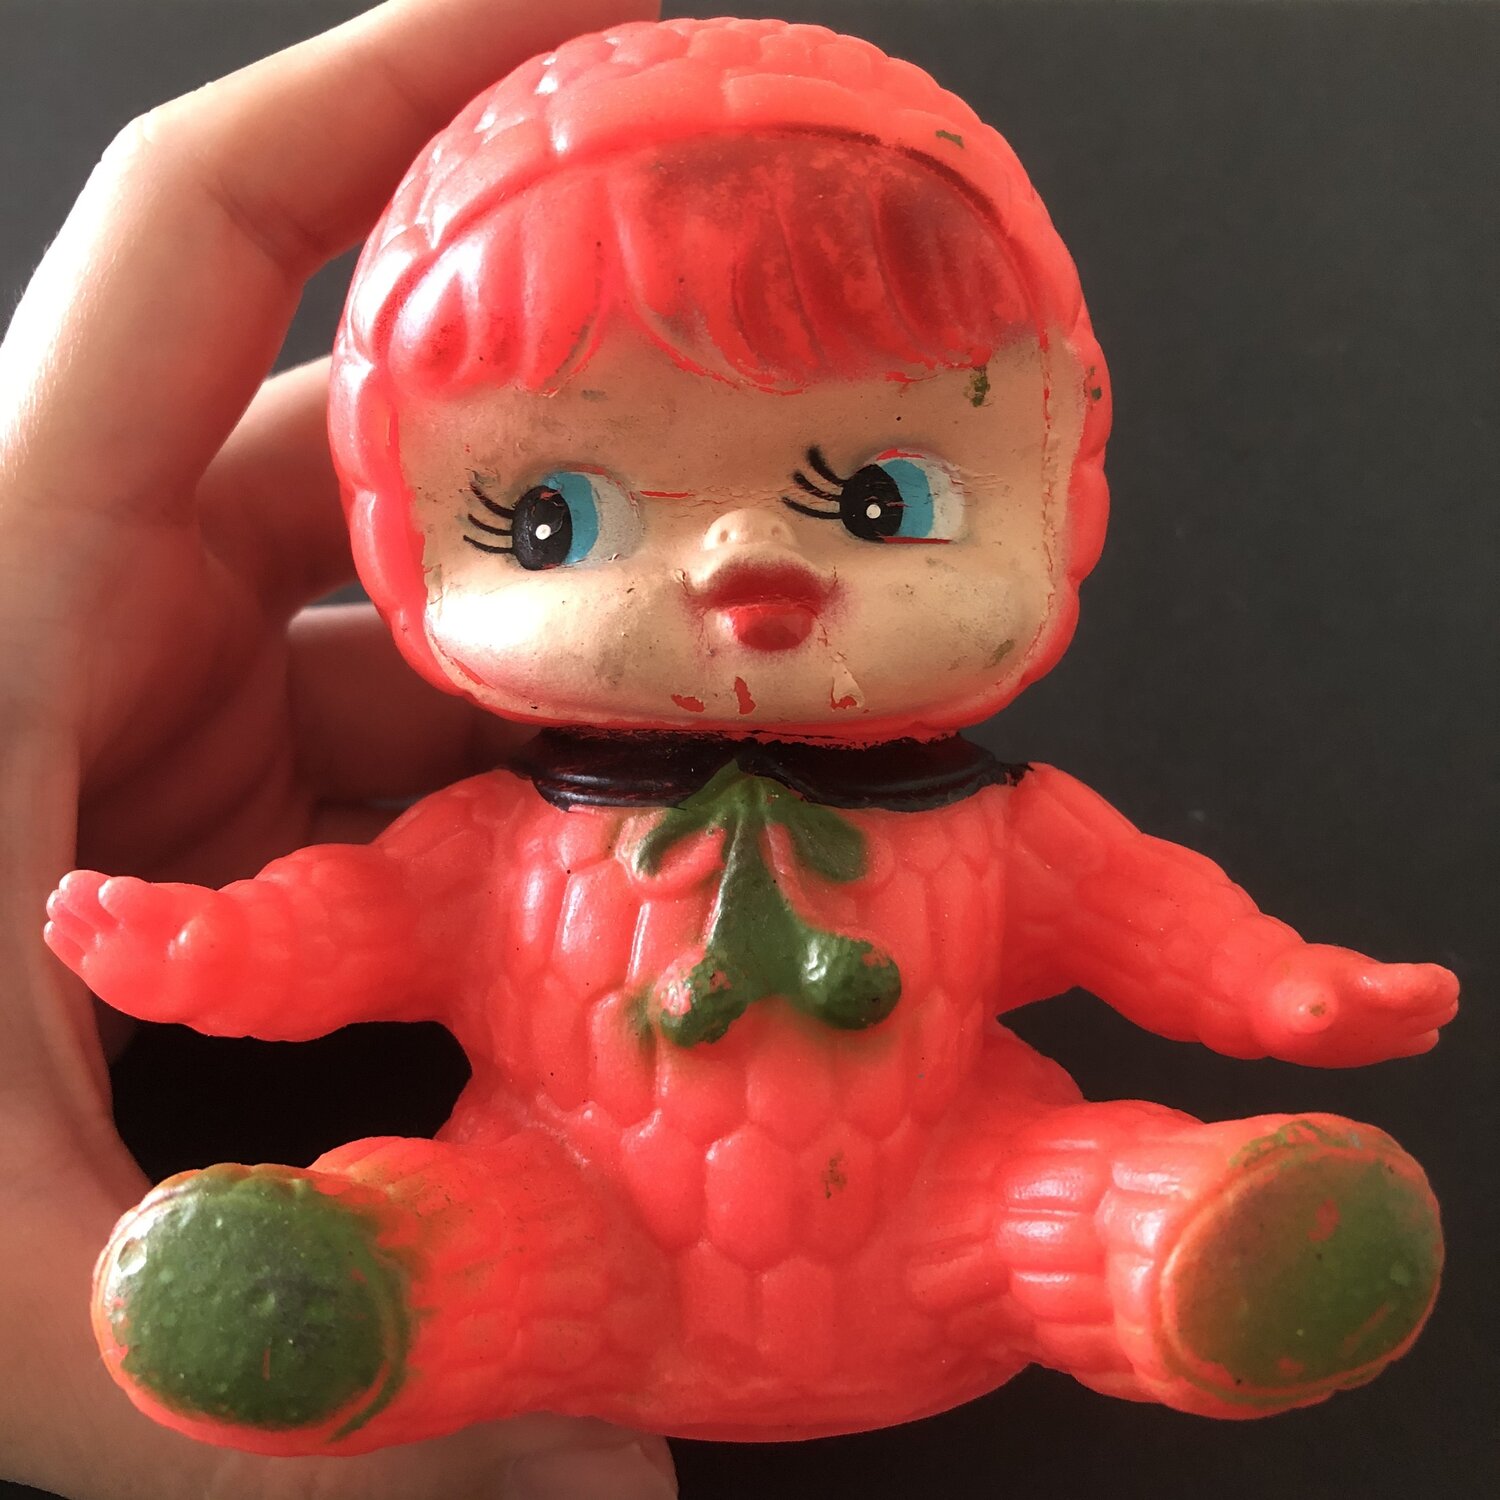 Vintage 1970s rubber squeaky baby doll toy — Craftcheesefactory.com